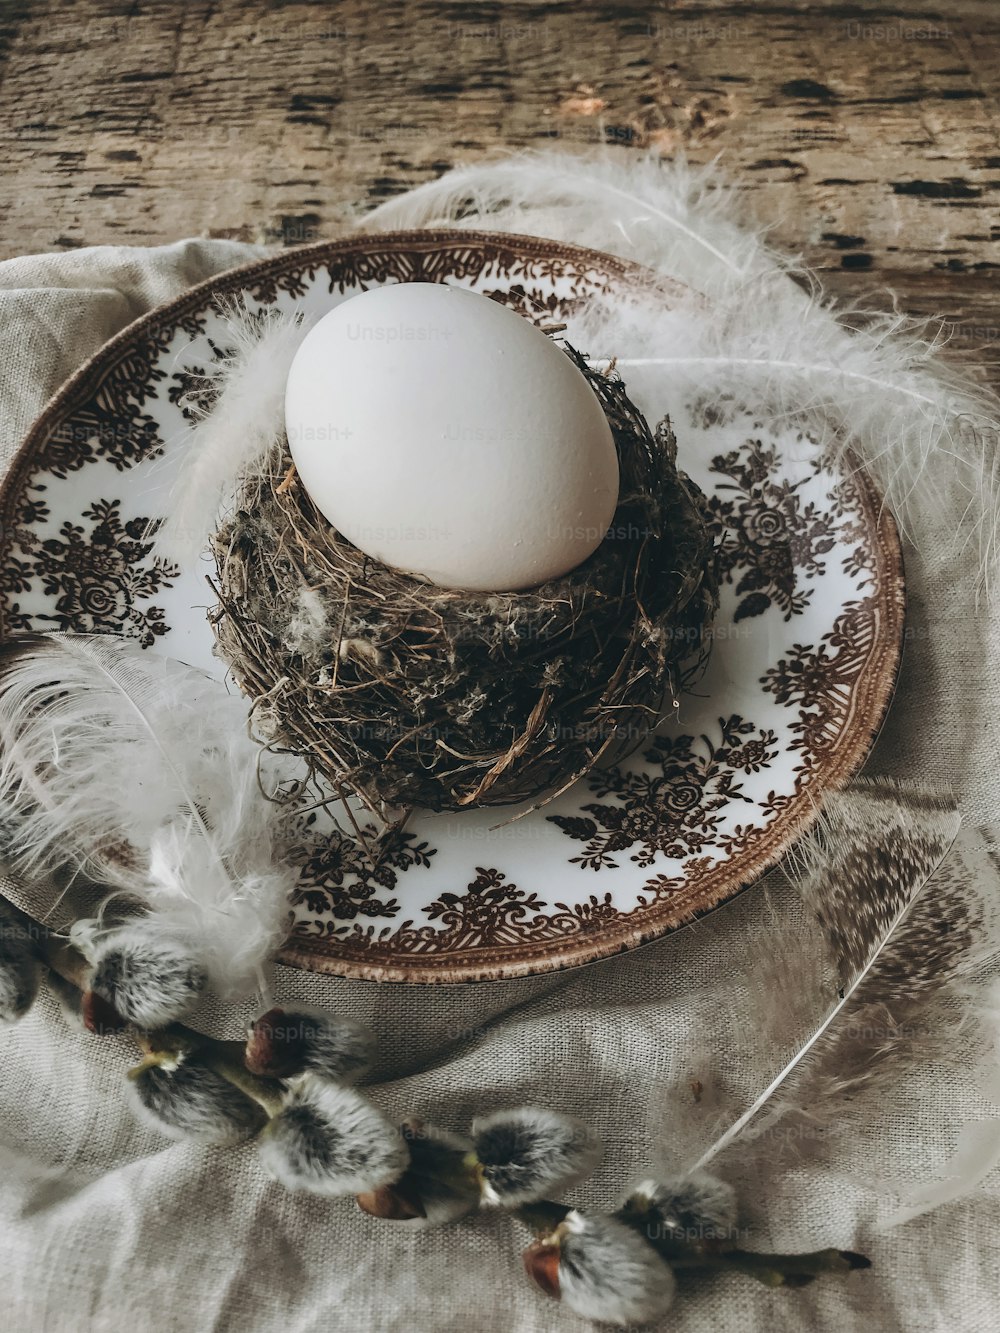 Stylish rustic Easter table setting. Natural easter egg in nest with soft feathers on vintage plate, linen napkin, pussy willow branches on aged wood. Rural Easter still life. Happy Easter